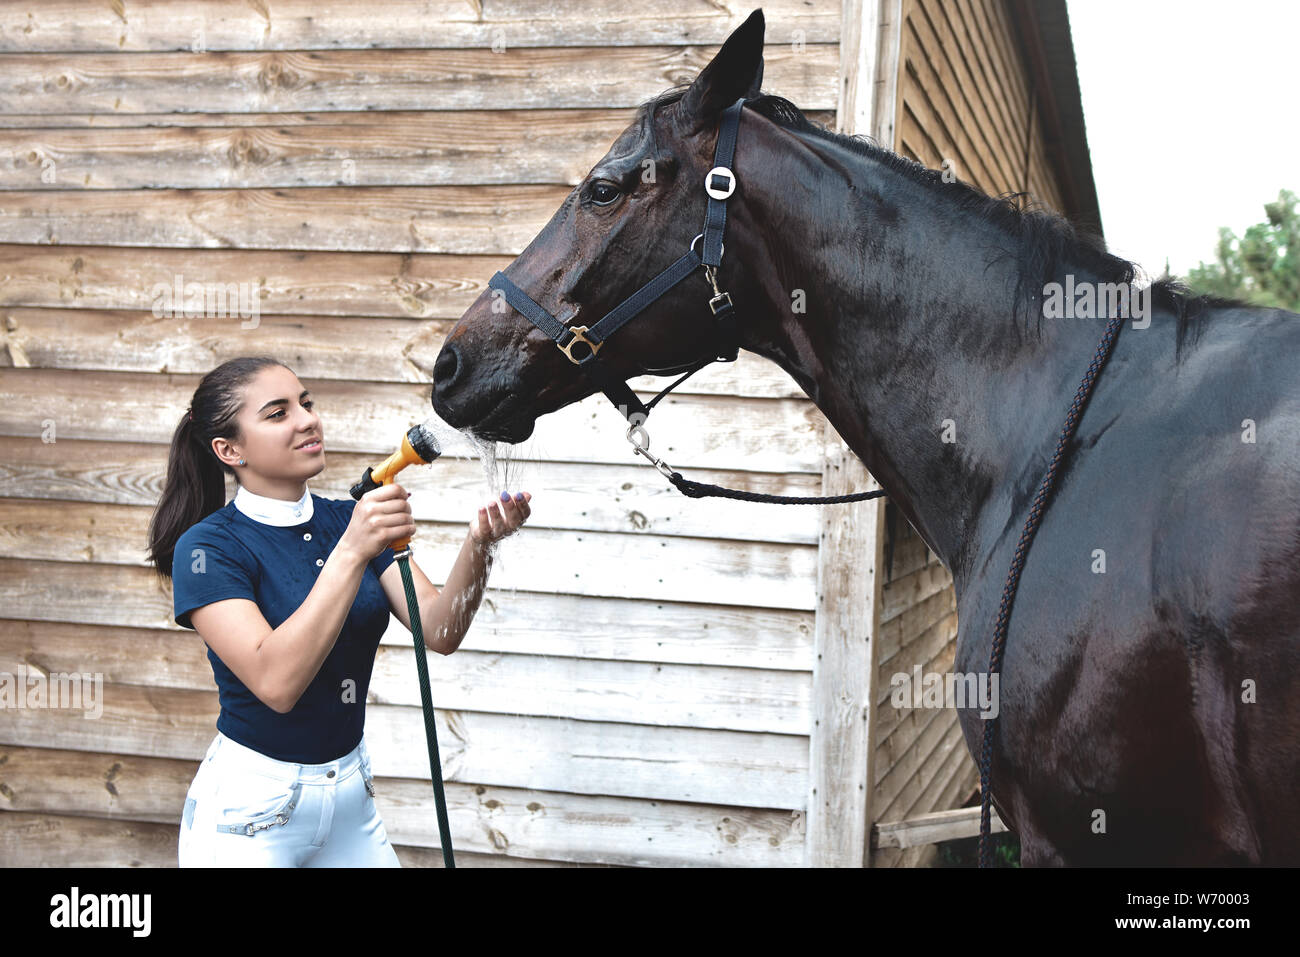 The process of washing the horse with water from a hose, preparing for the competition. recreation Stock Photo